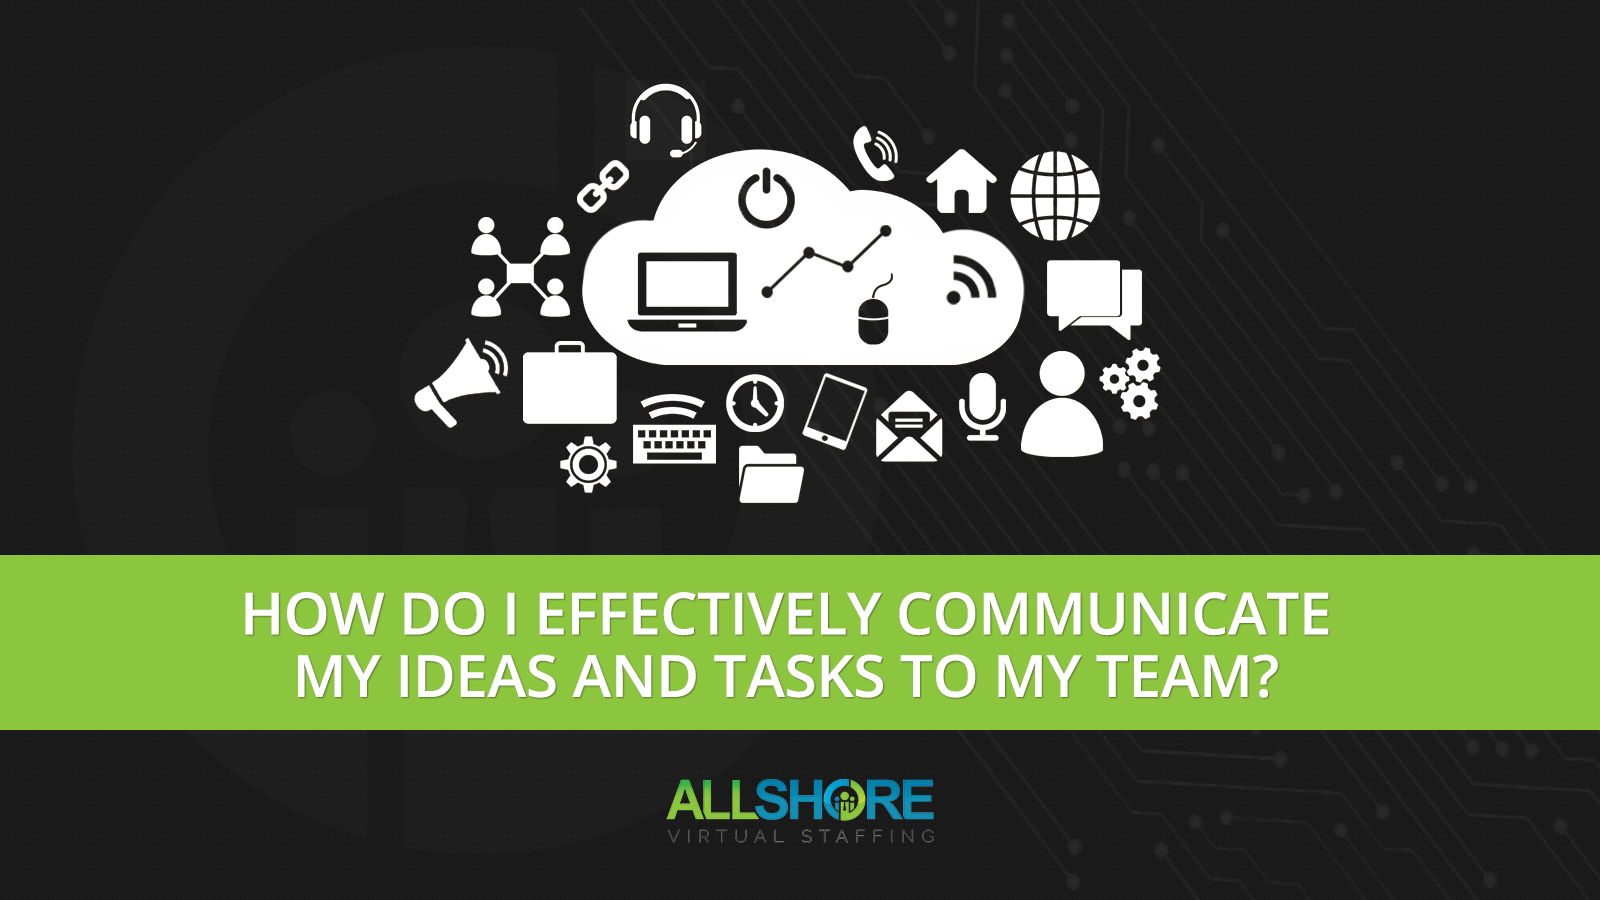 How Do I Effectively Communicate My Ideas and Tasks to My Team?